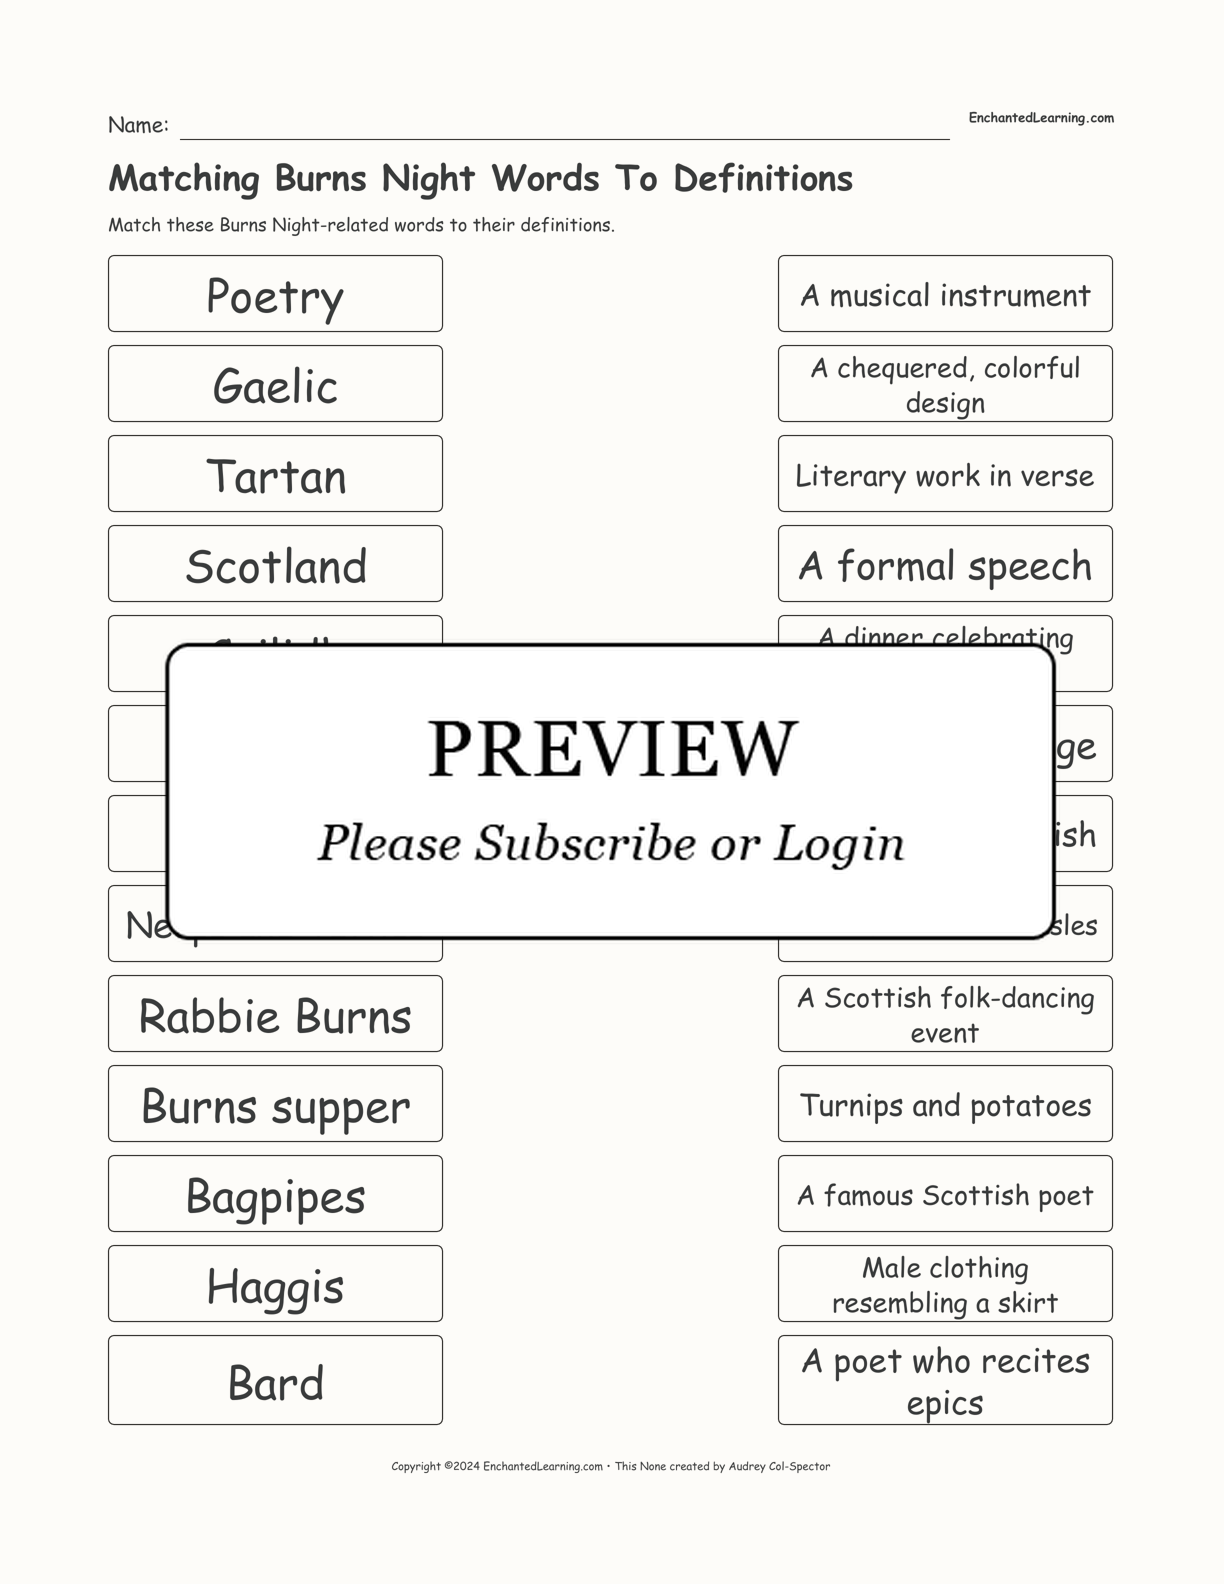 Matching Burns Night Words To Definitions interactive worksheet page 1